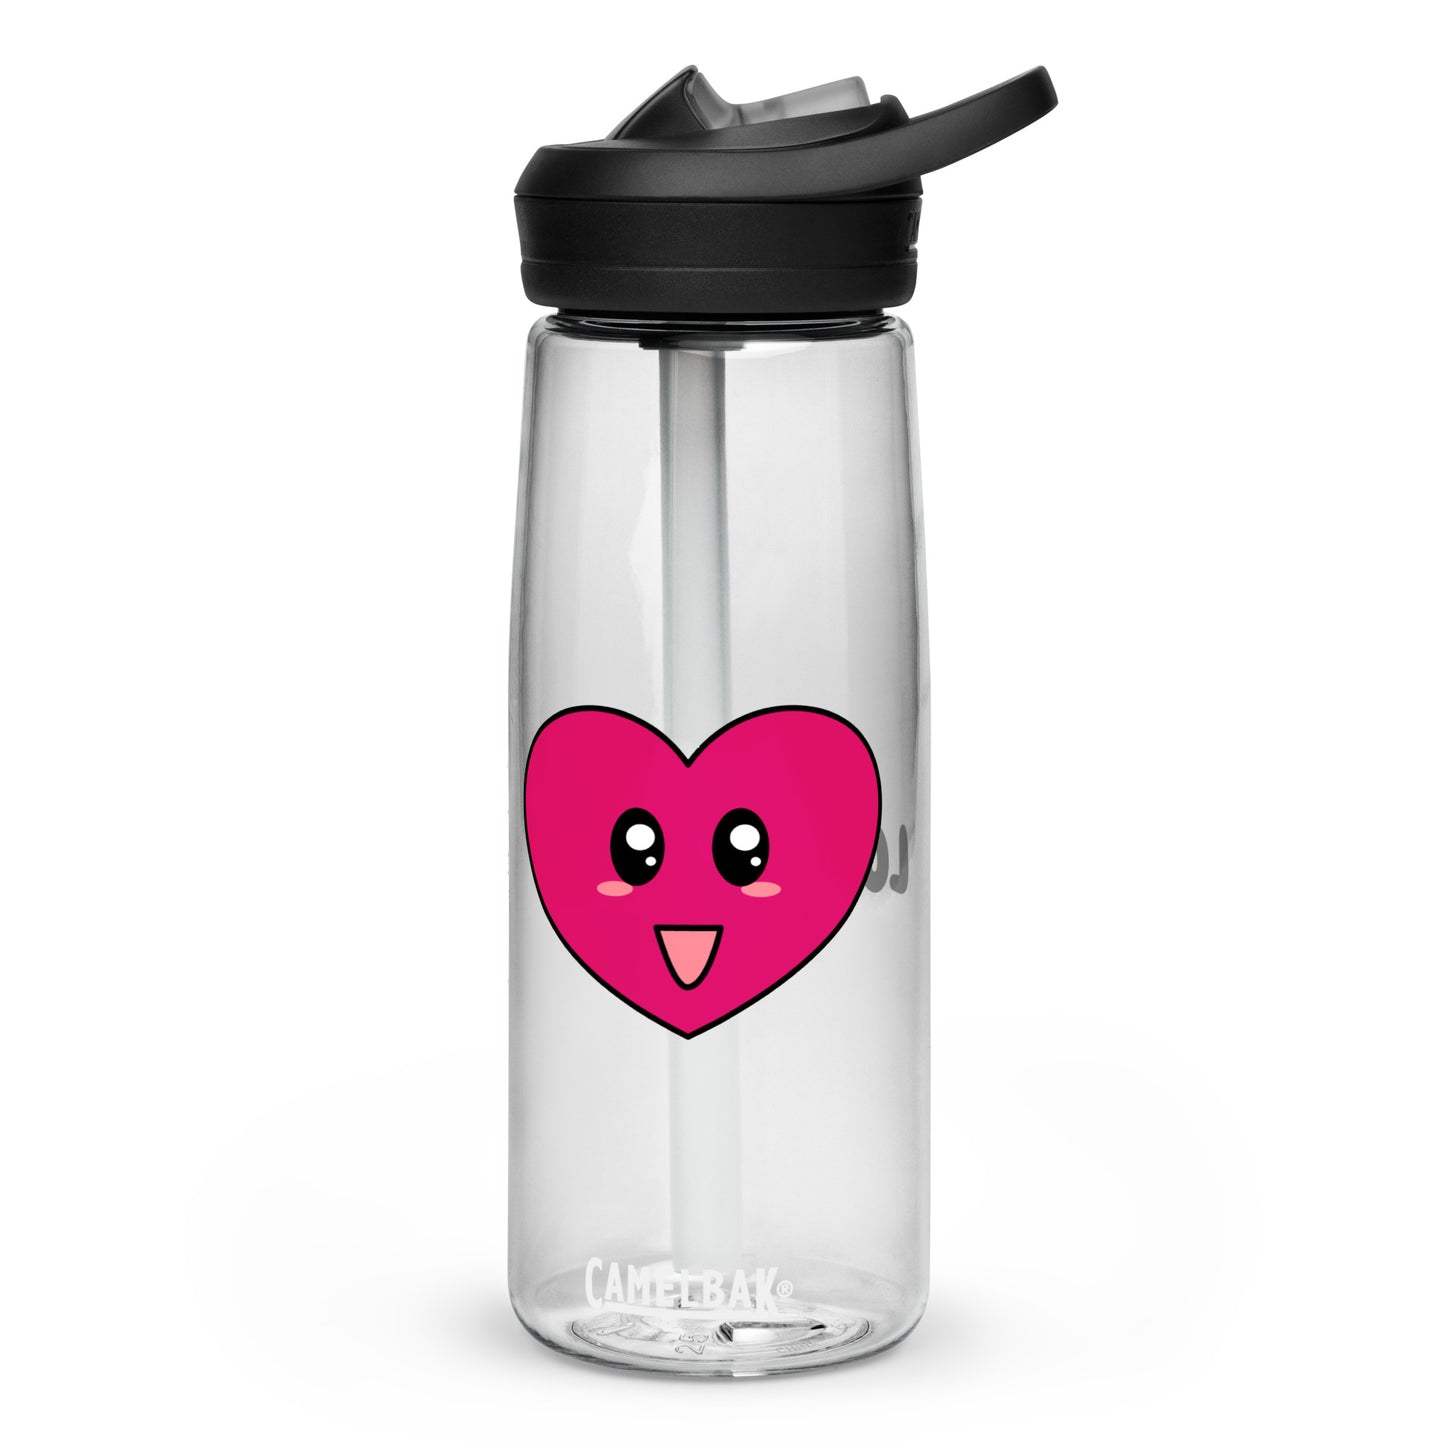 25oz Water Bottle with Love Chibis® Heart